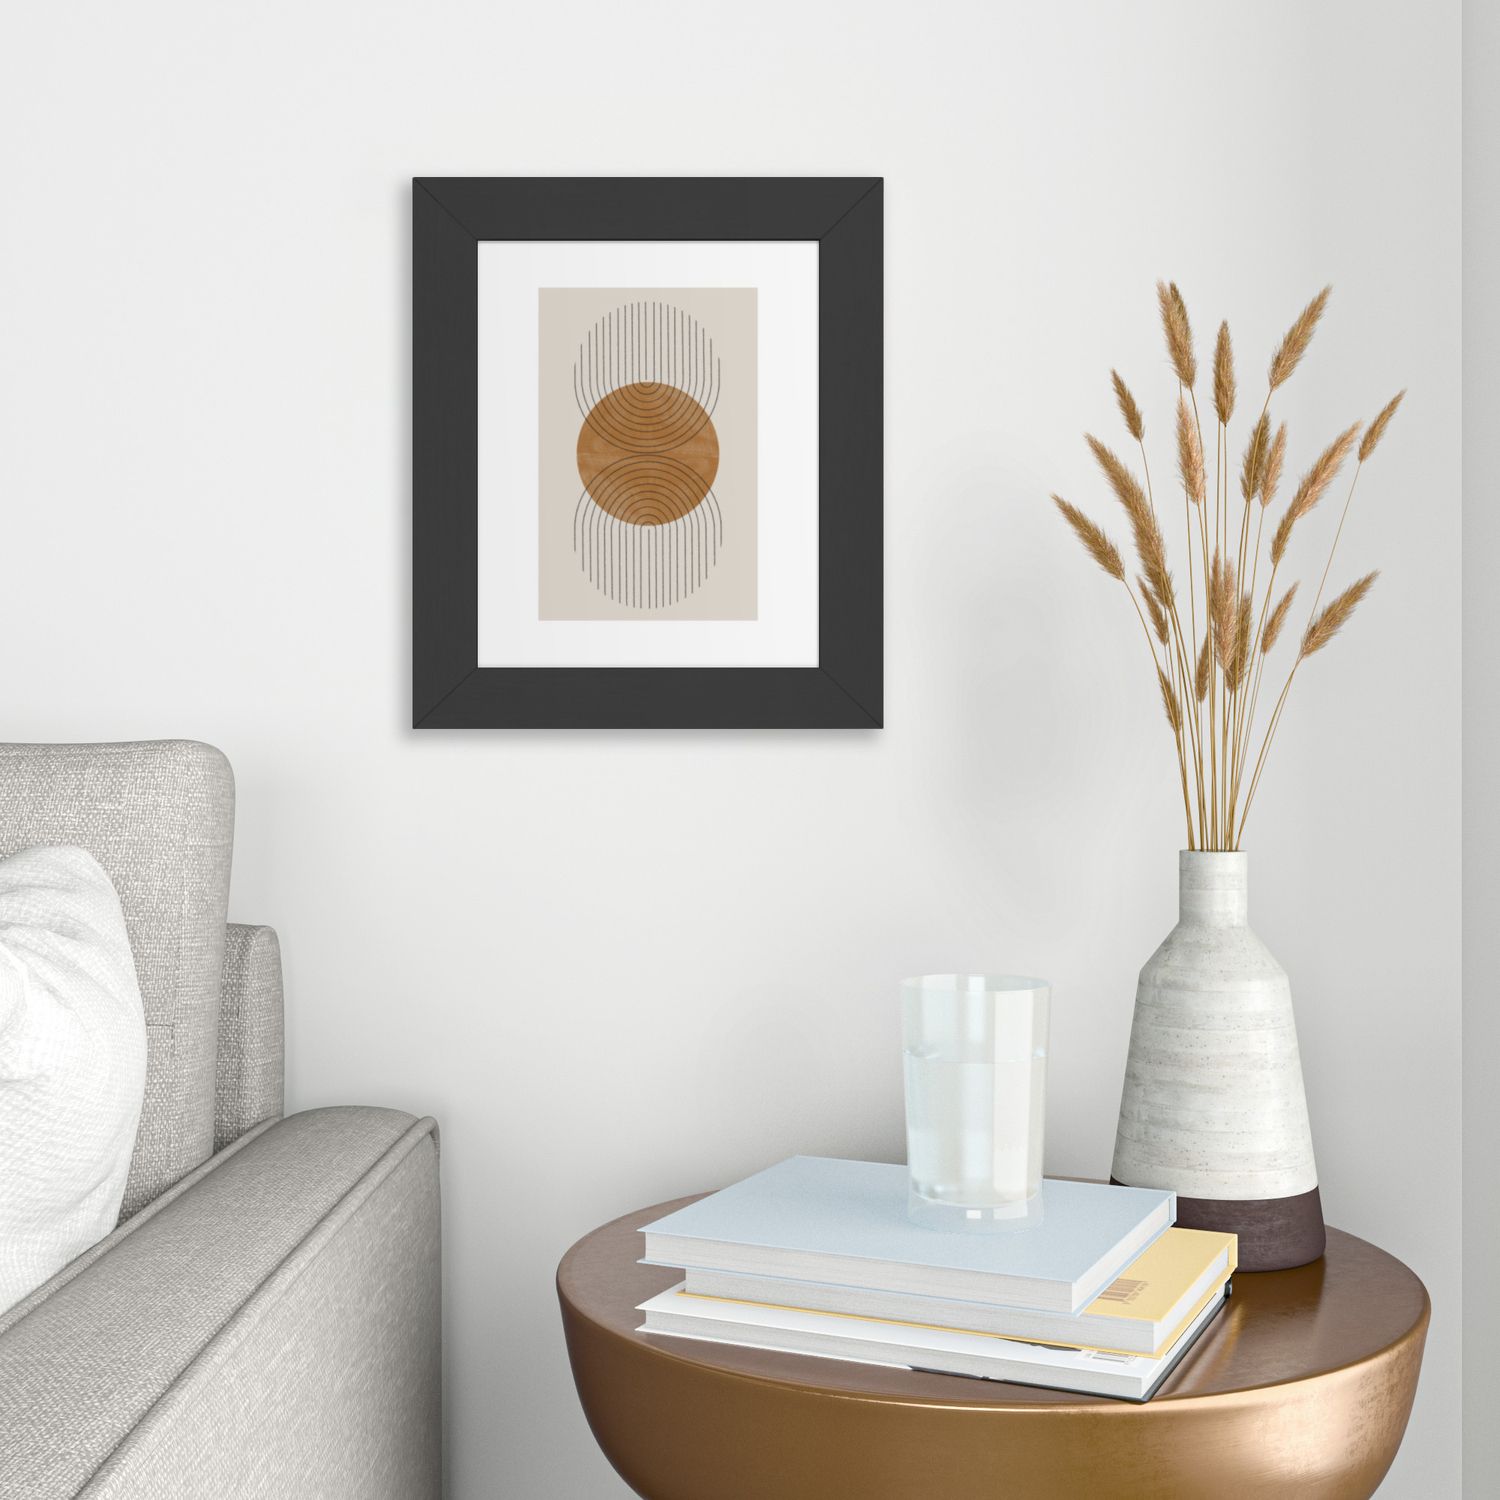 Perfect Touch Framed Art Printthe Miuus Studio | Society6 Intended For Recent Perfect Touch Wall Art (View 4 of 20)